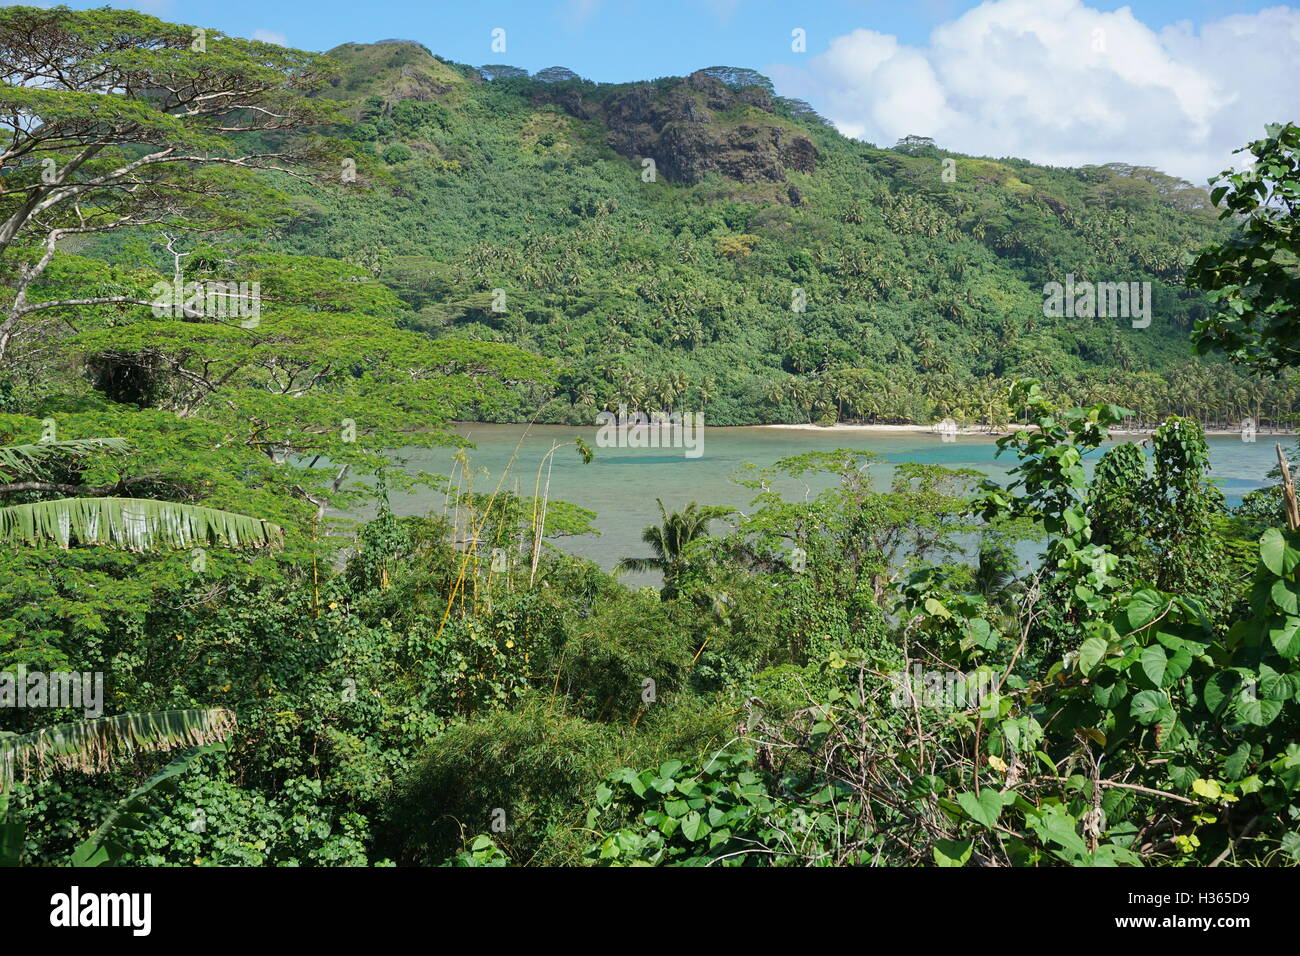 Lush green vegetation and lagoon view of a tropical island, Huahine, south Pacific ocean, French Polynesia Stock Photo